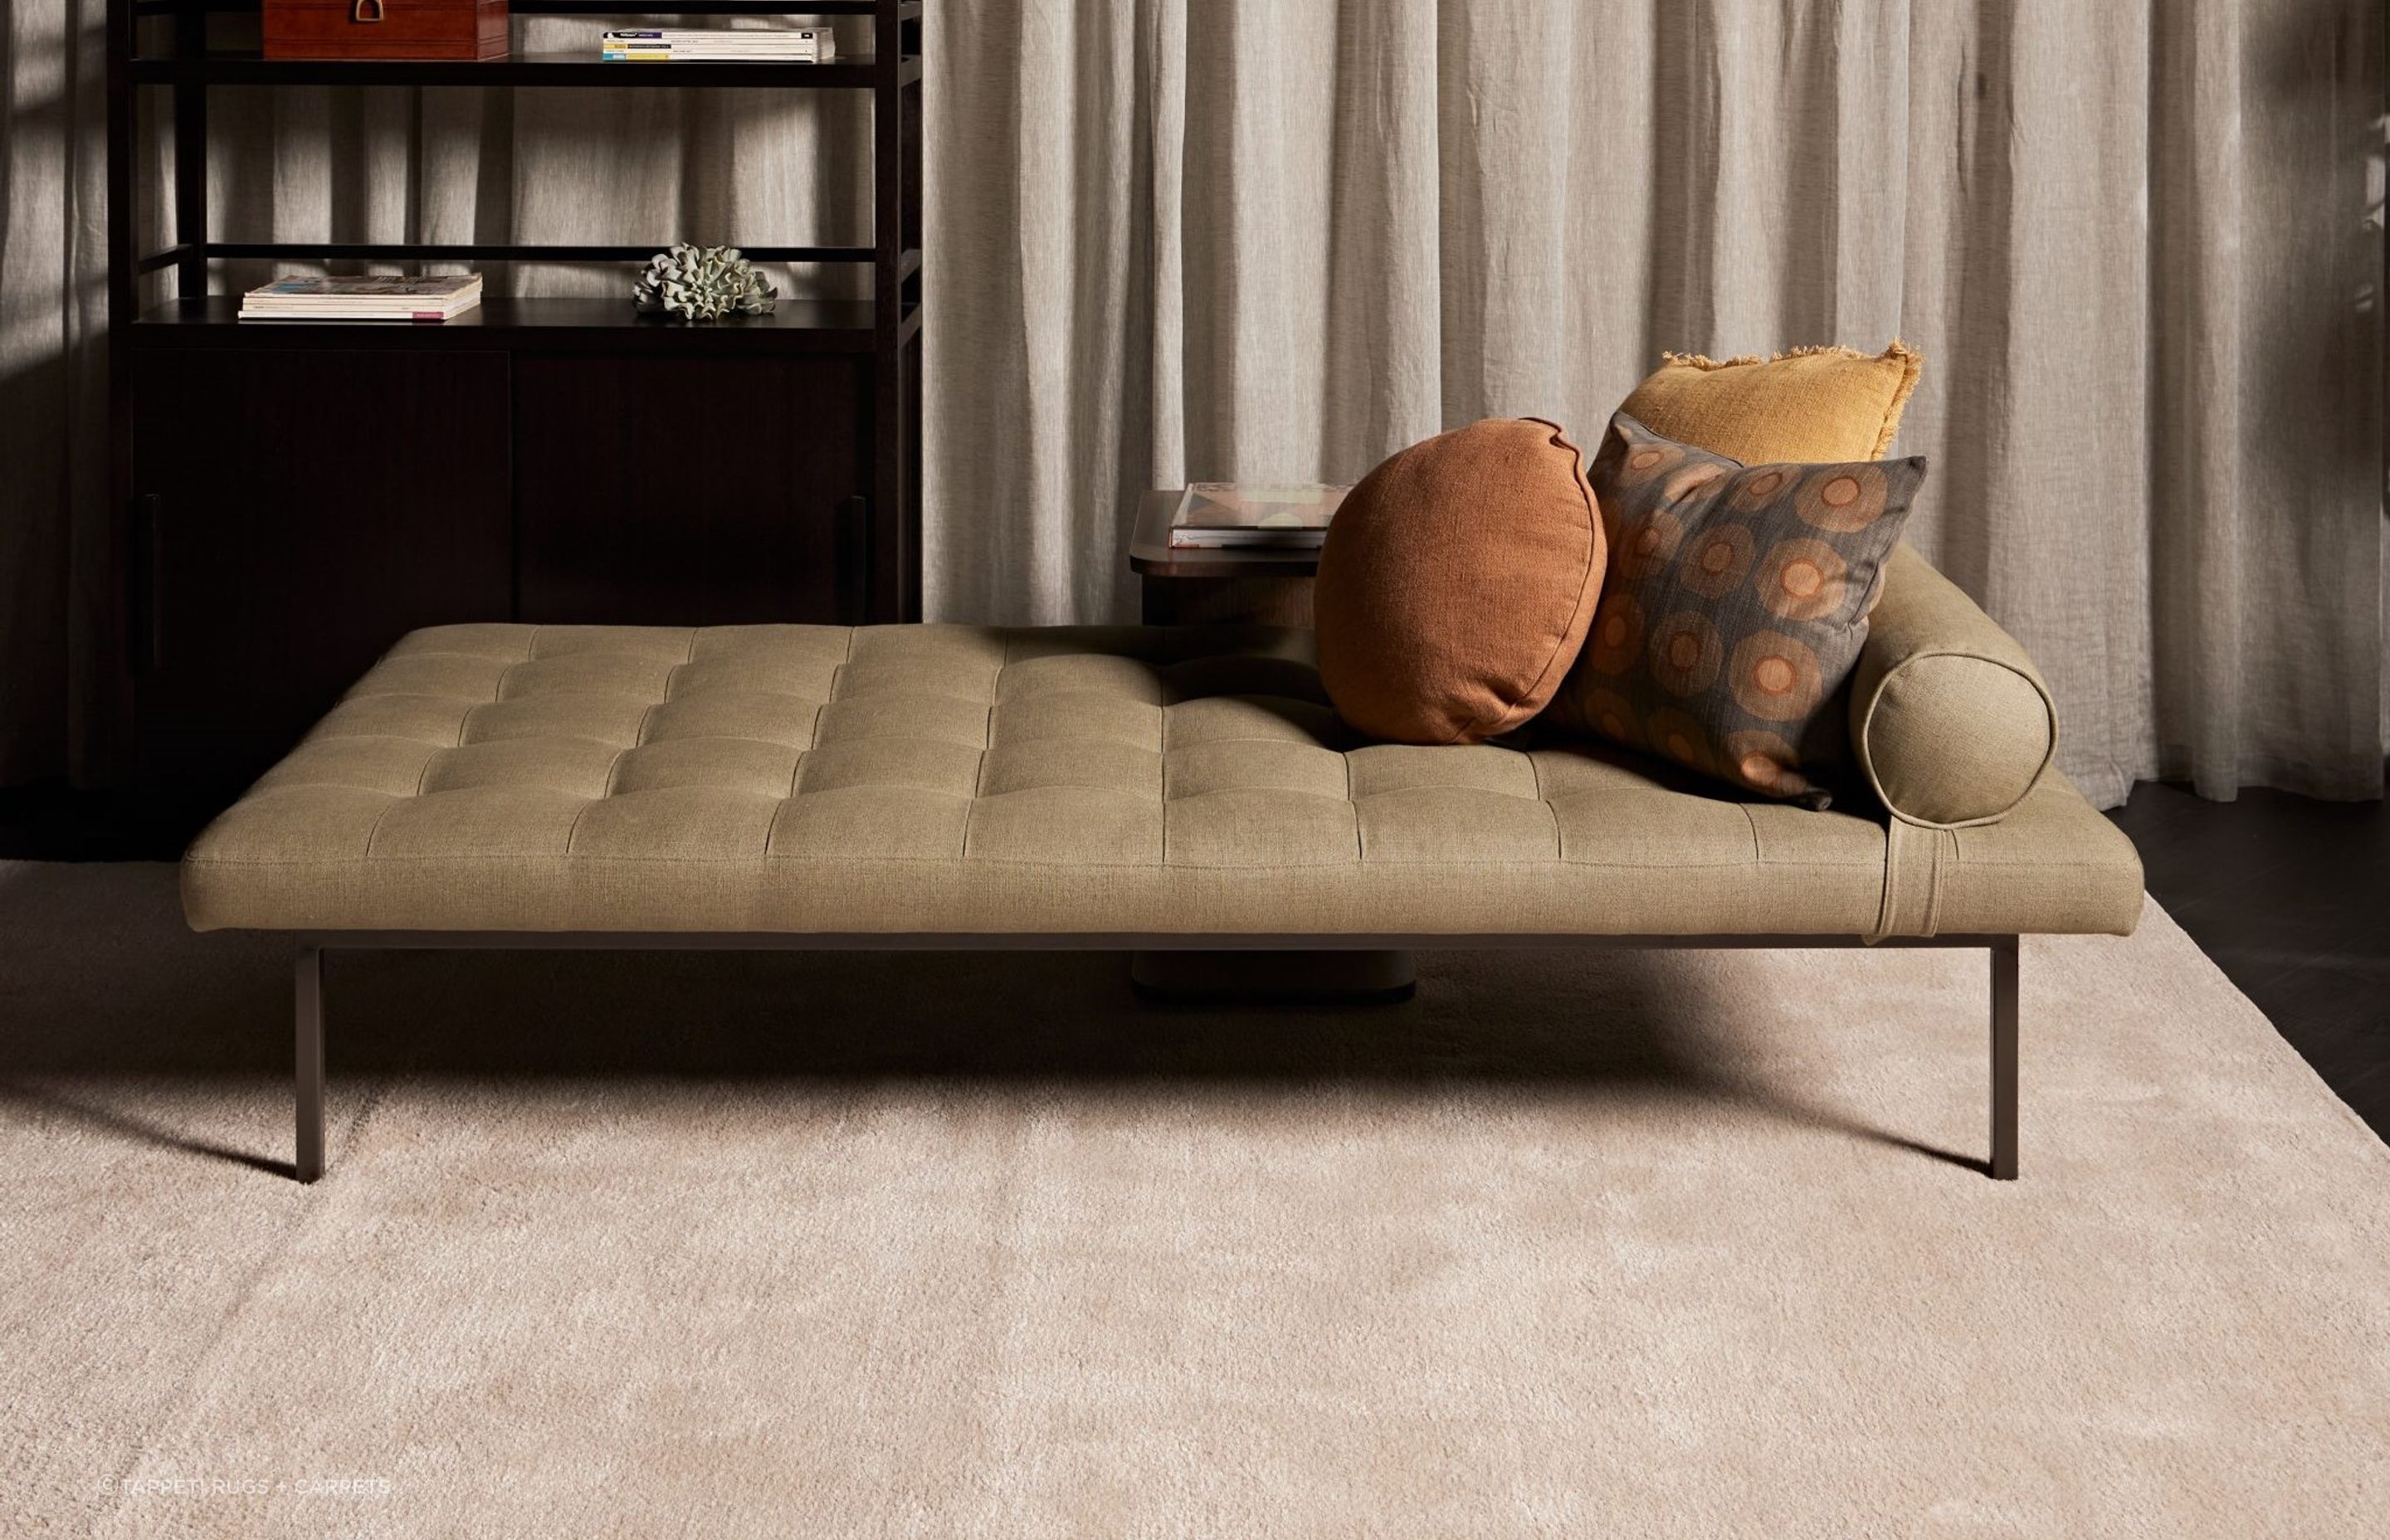 The Ora Shaggy Sand rug is a luxurious shag pile rug that is both sophisticated and cosy